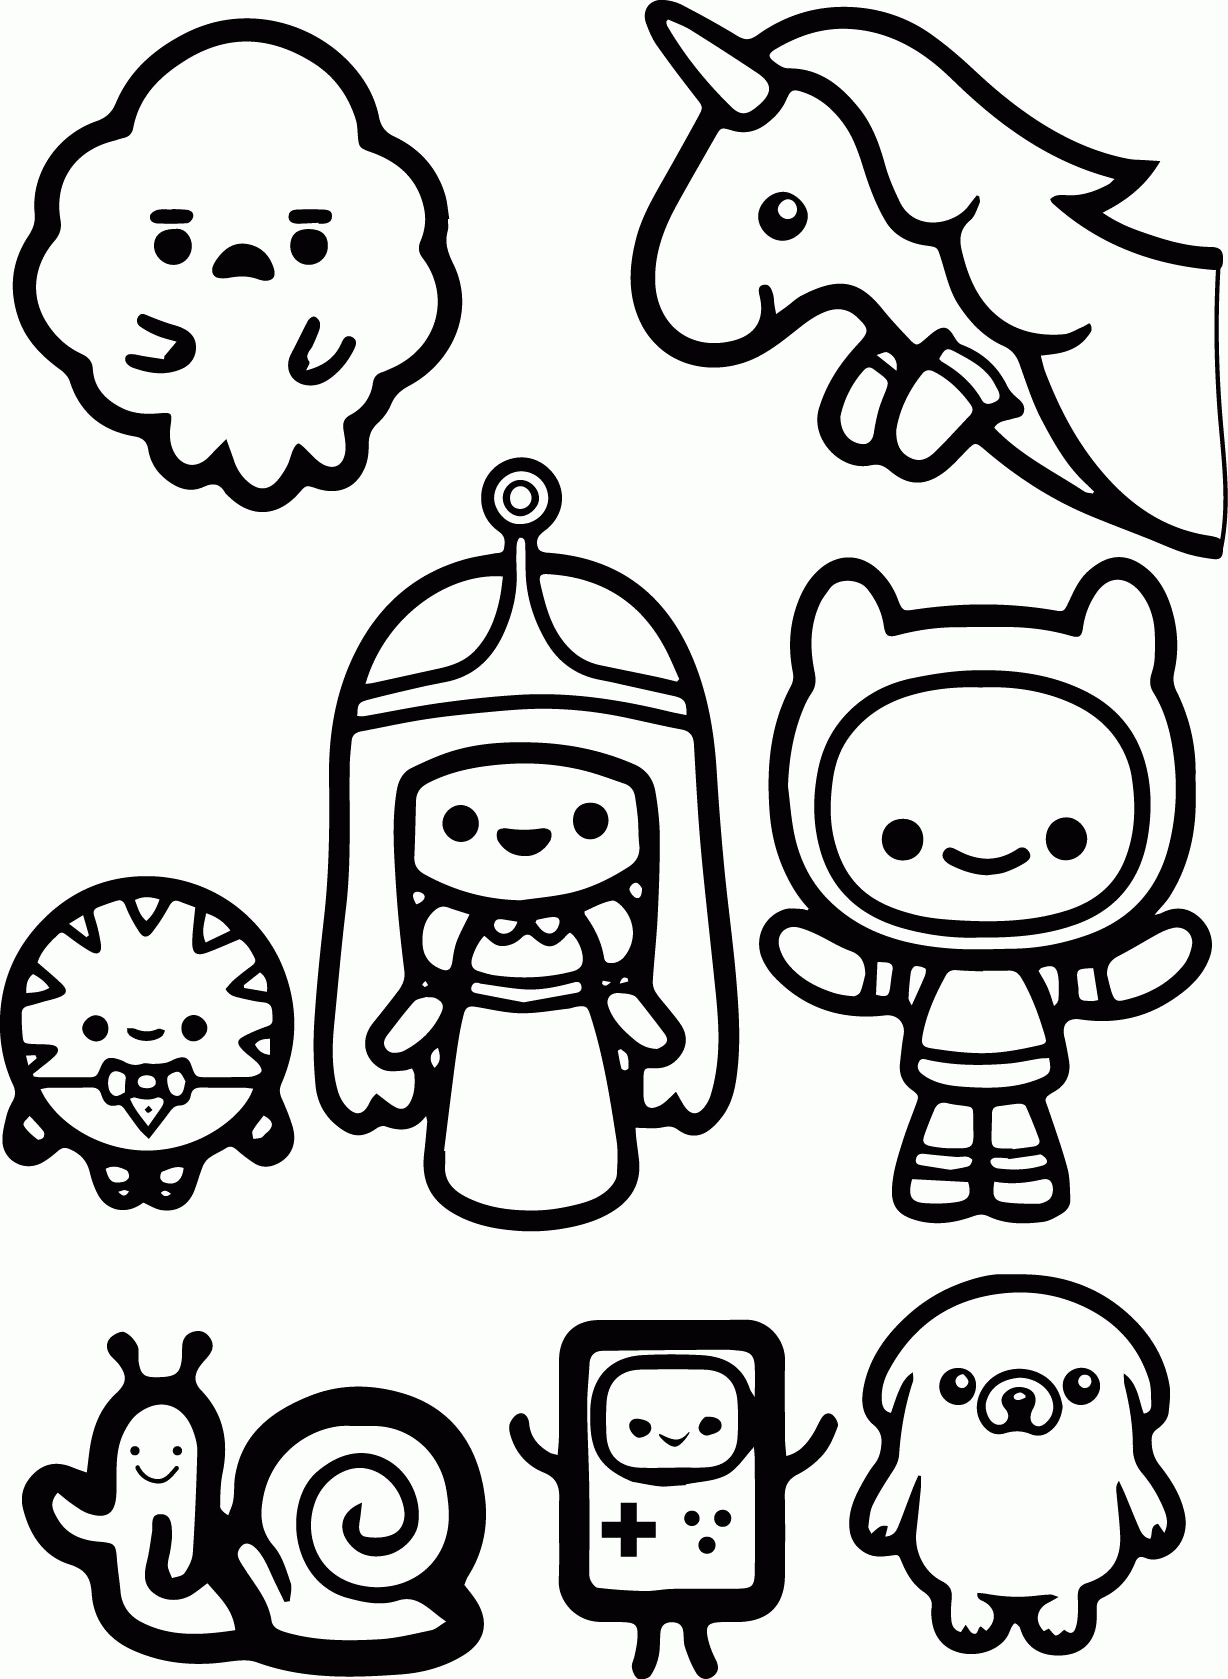 Adventure Time Finn And Jack Child Coloring Page | Wecoloringpage